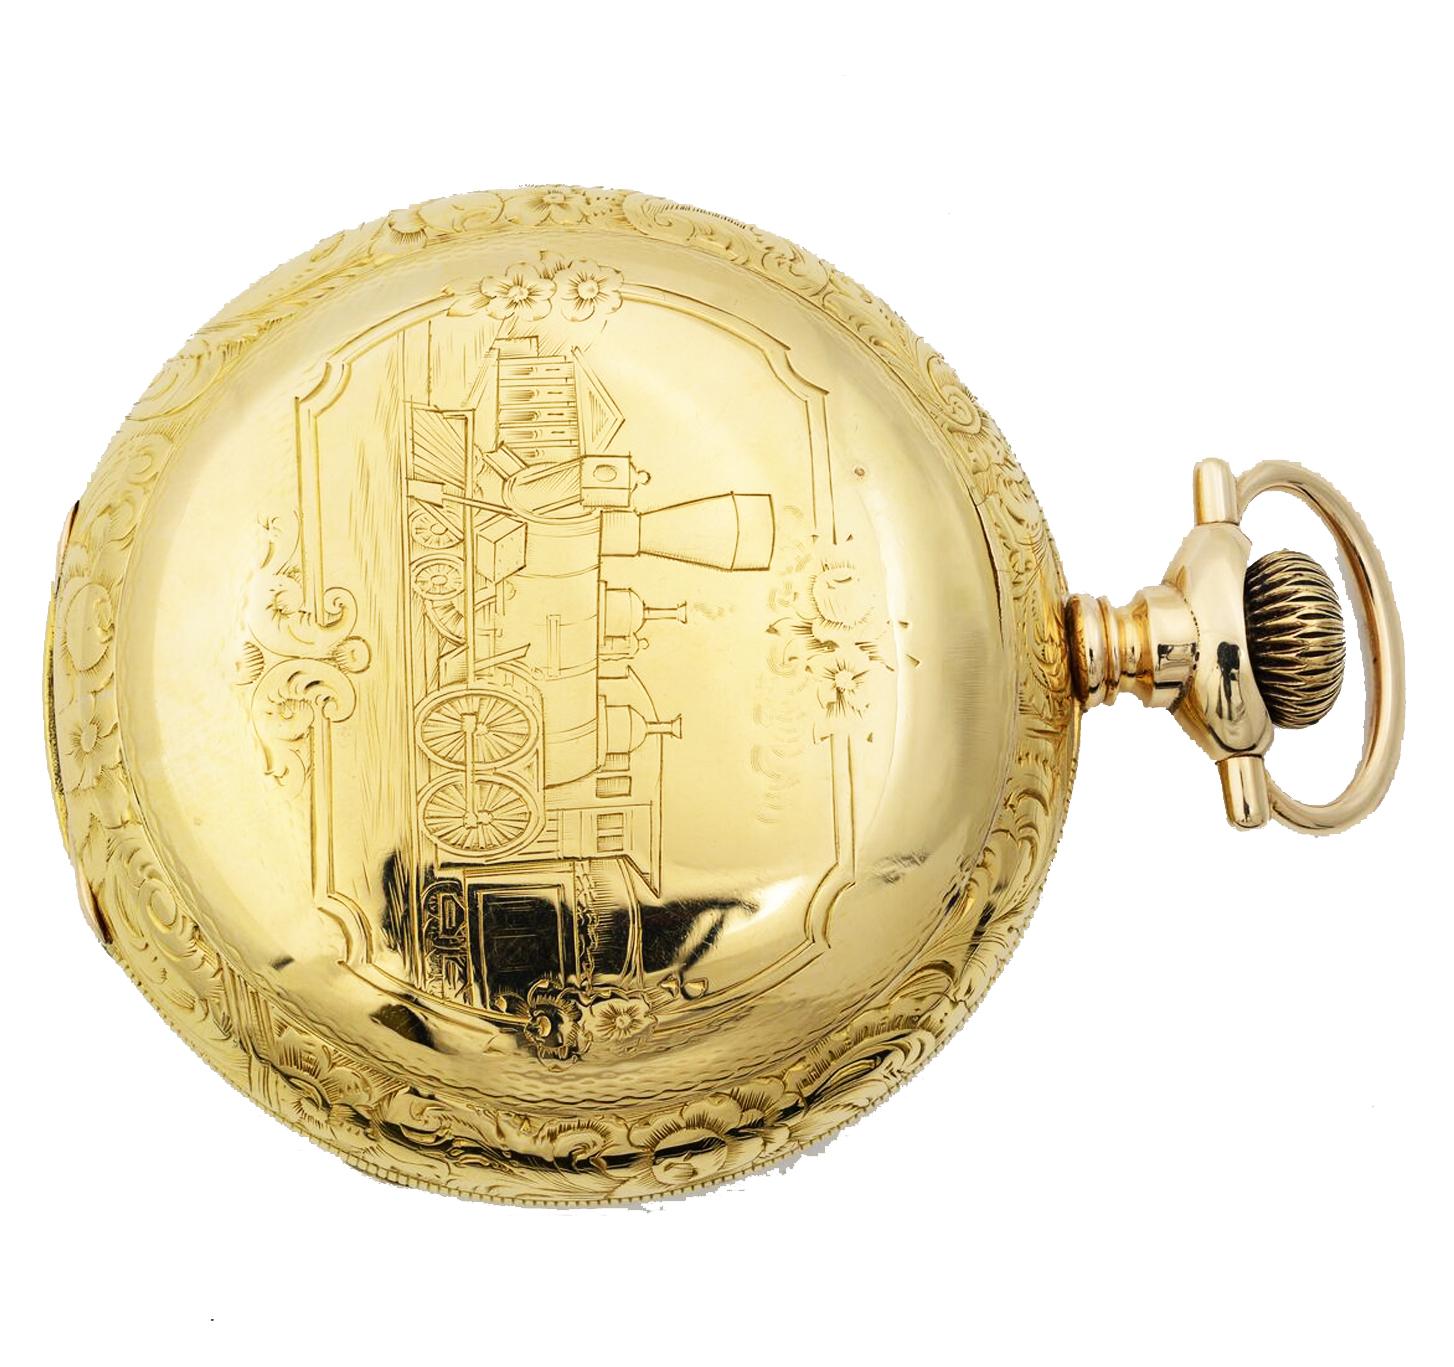 Waltham Rail Print 18 Karat Gold 38113 circa 1900-1910 Pocket Watch I4058053 In Excellent Condition In New York, NY